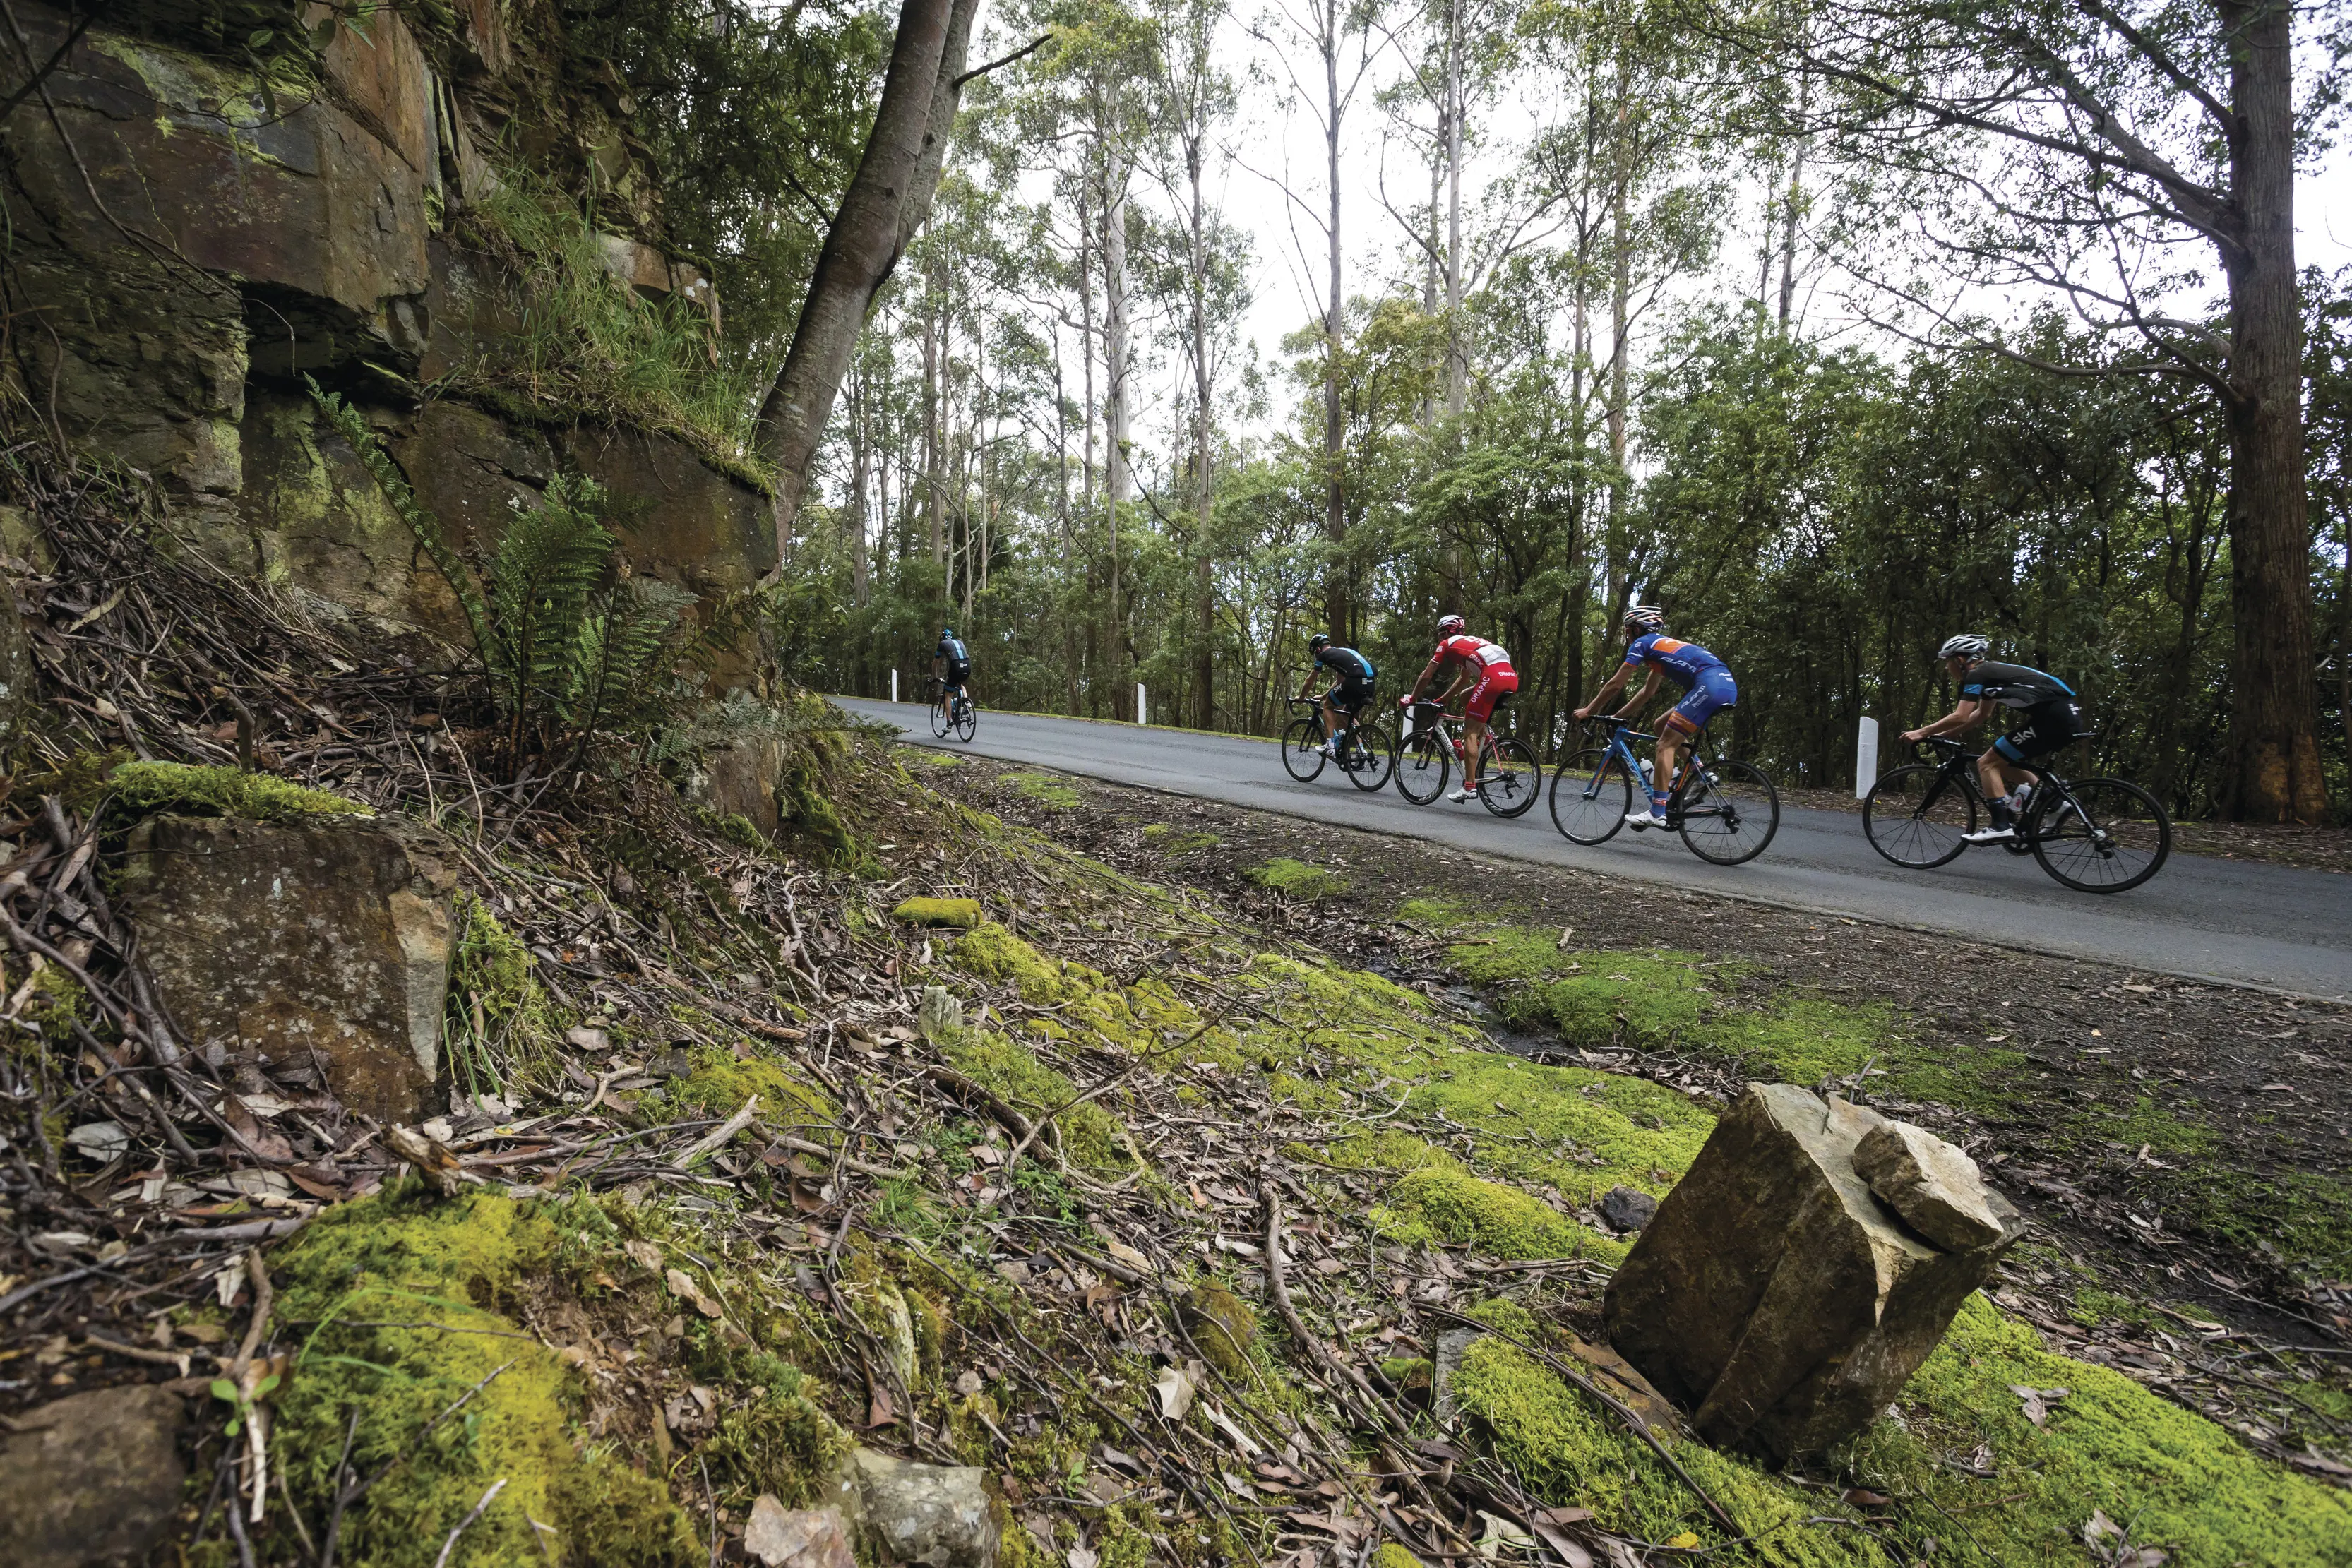 Four cyclists, cycling along a road on kunanyi / Mt Wellington, surrounded by trees and lush greenery.